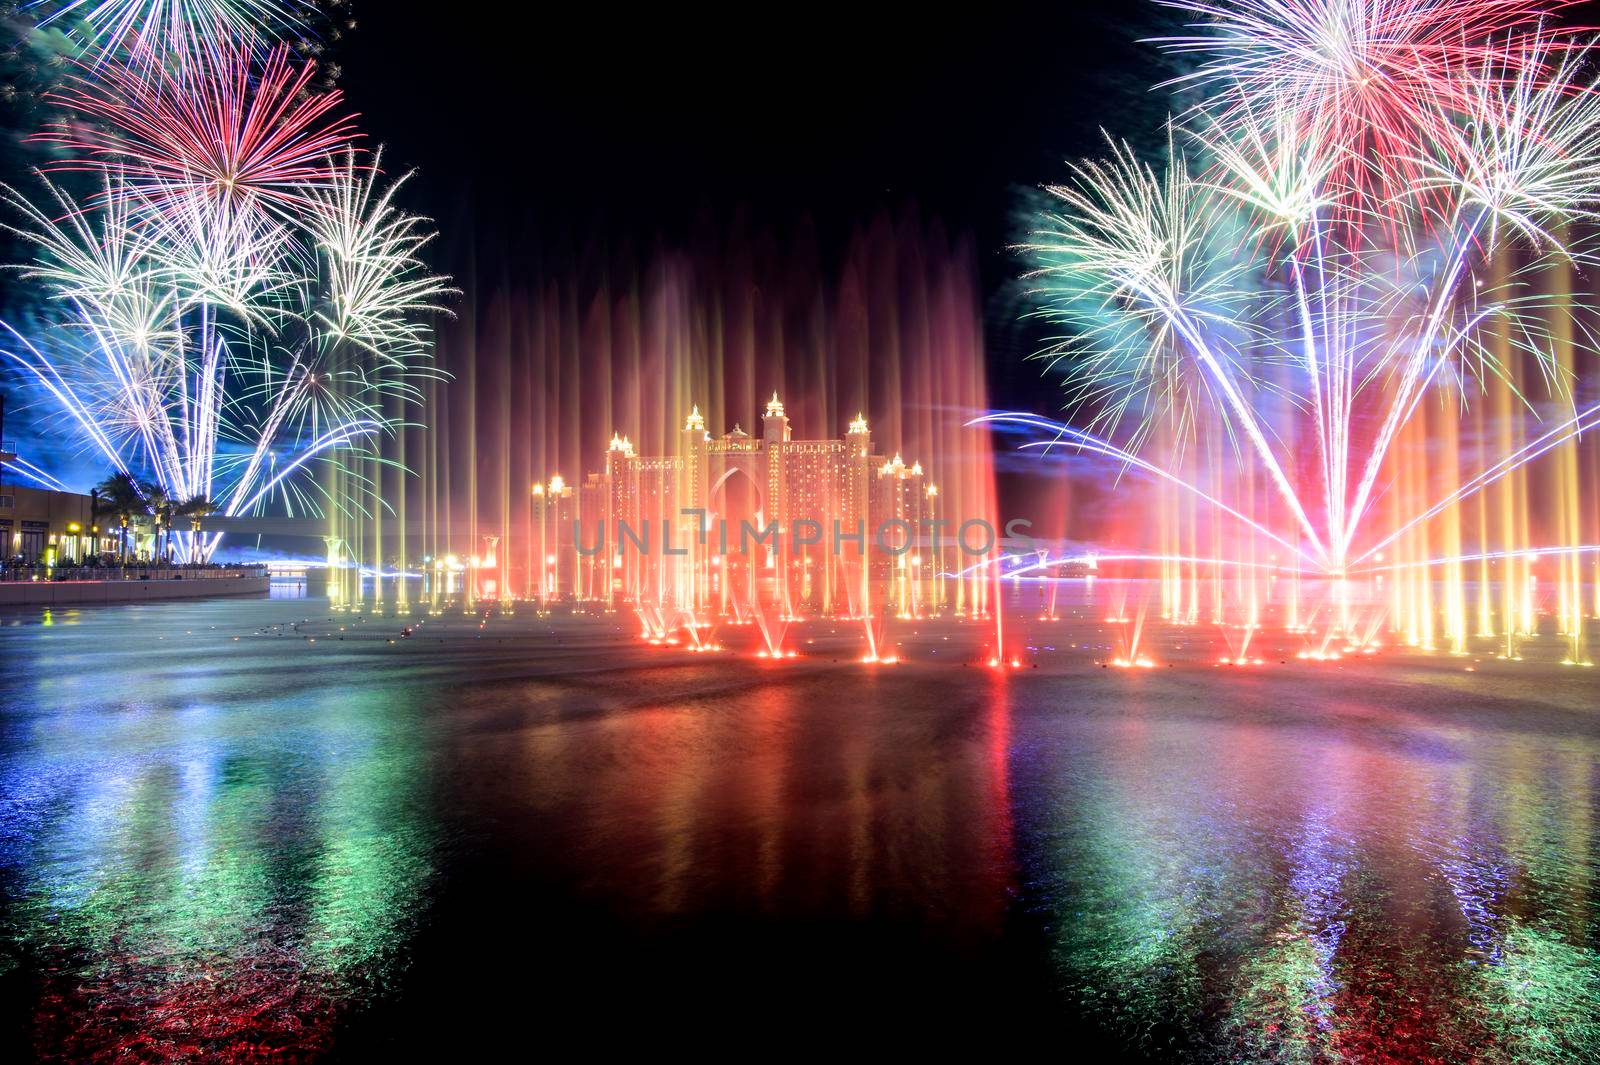 13th november 2020 ,the pointe ,dubai. View of the spectacular fireworks and the colorful dancing fountains during the diwali celebration at the pointe palm jumeirah, dubai , uae.